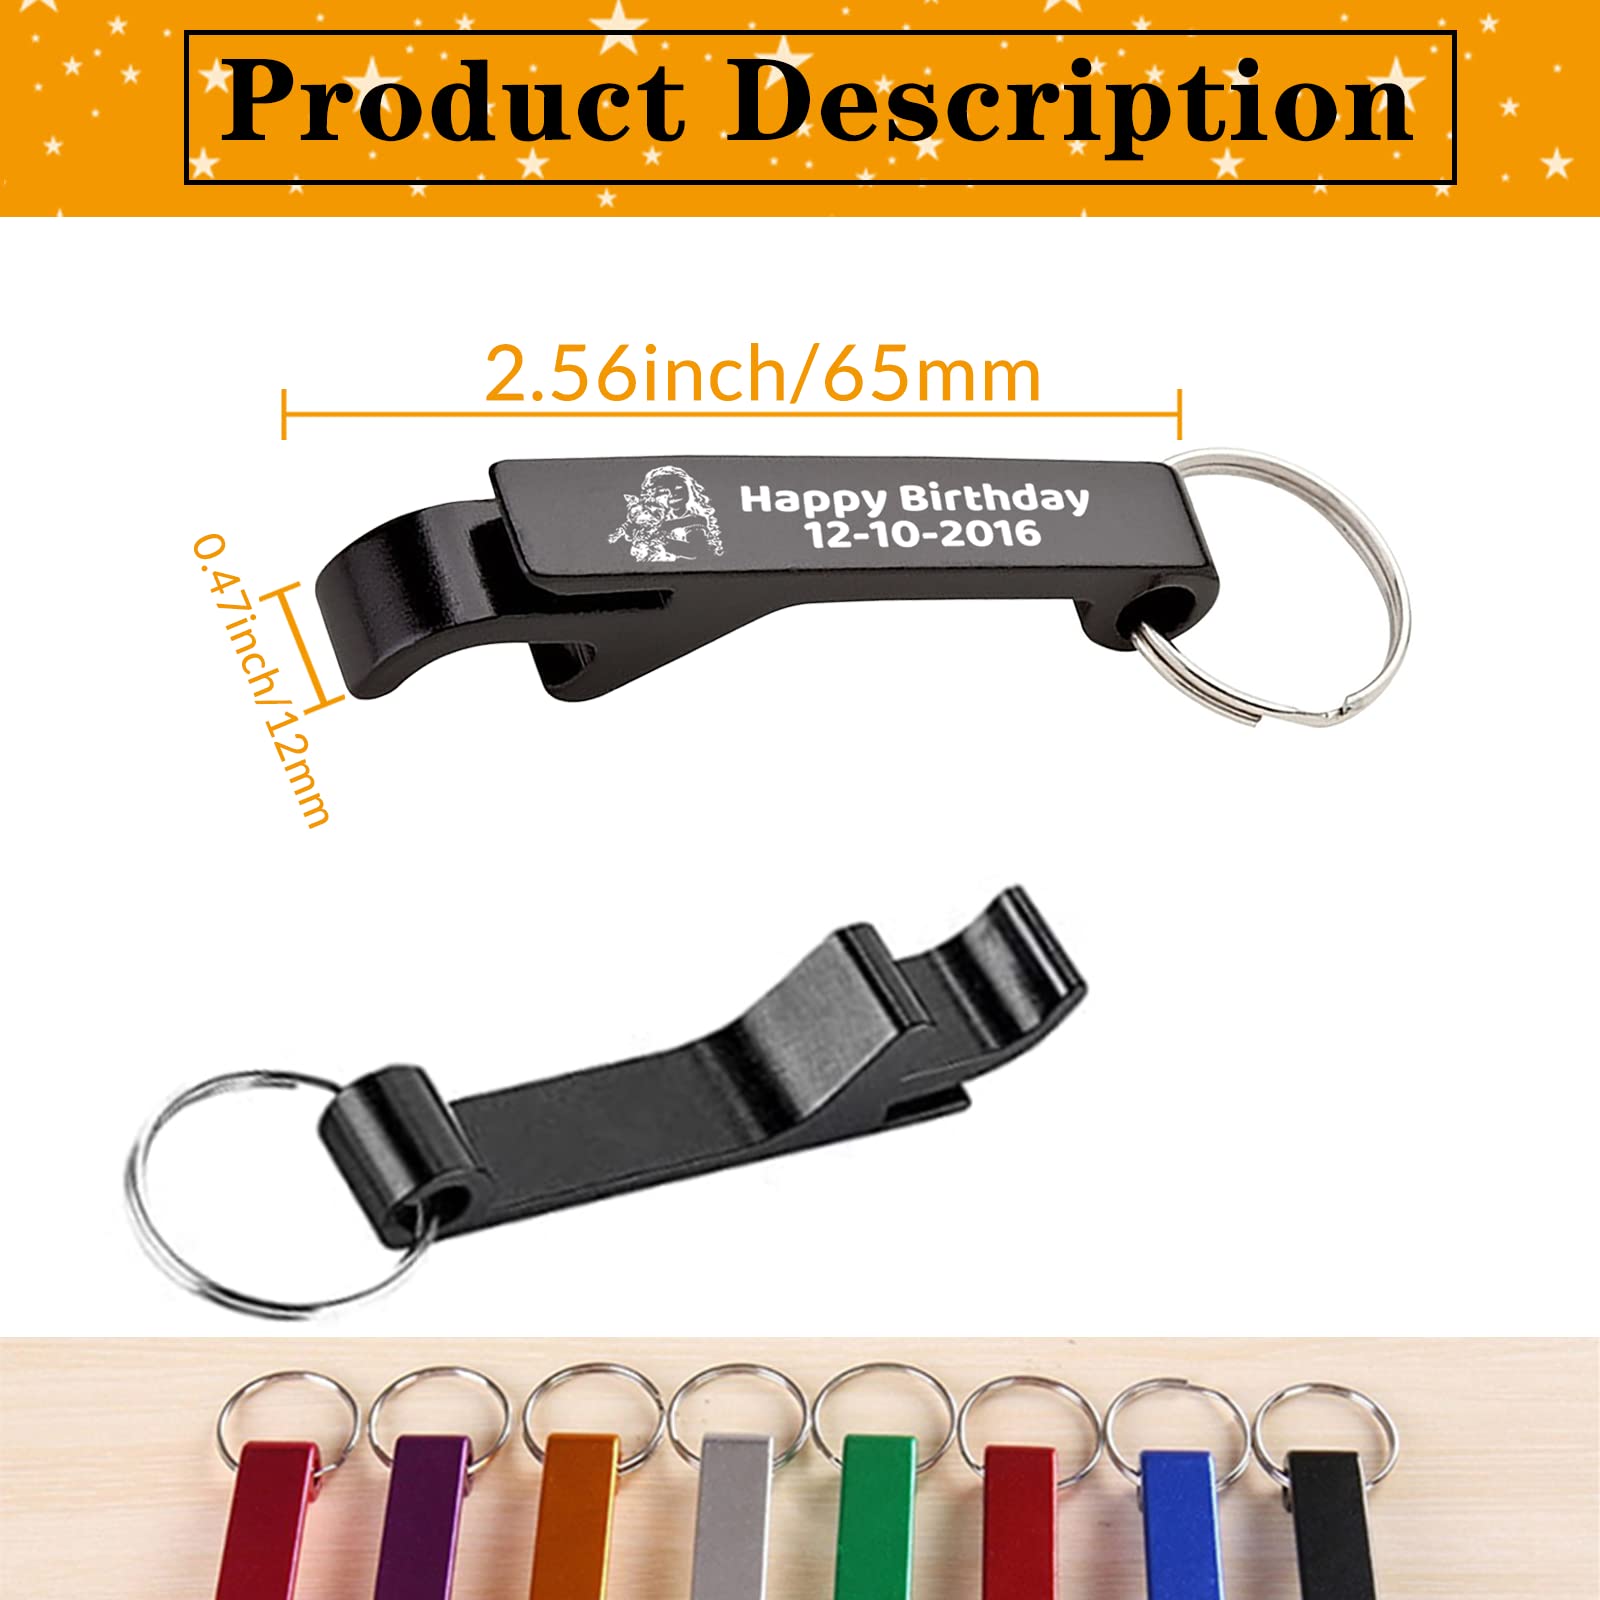 10pcs Custom Bottle Opener Keychain in Bulk, Personalized Bear Opener Engraved with Logo Text,Customized Aluminum Bottle Opener for Business Wedding Party Favors Gifts Black